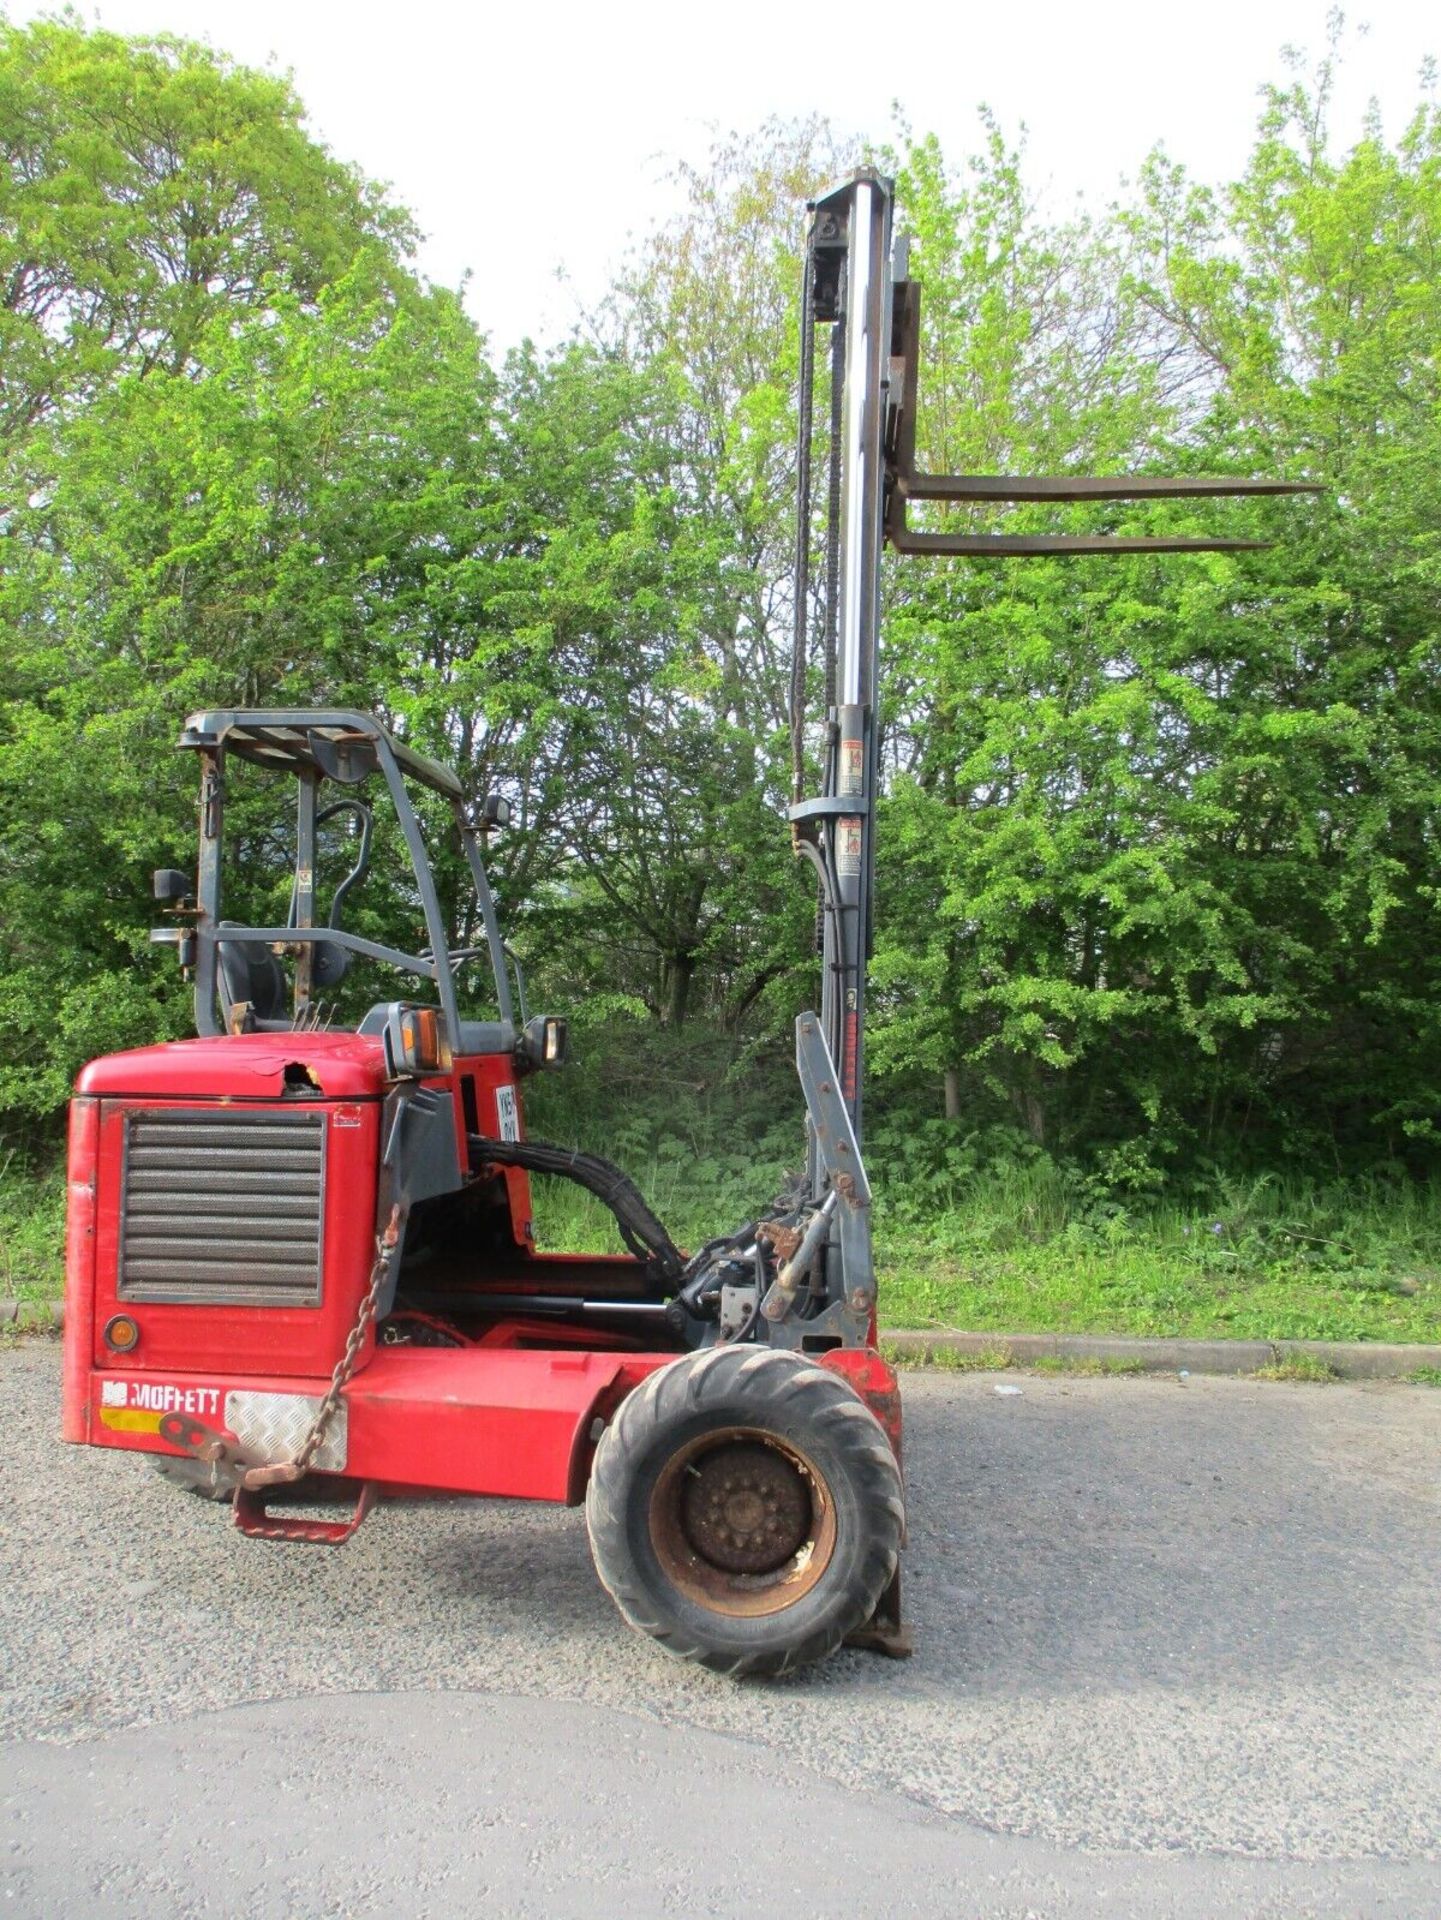 2008 MOFFETT MOUNTY M5 25.3 FORK LIFT FORKLIFT TRUCK MOUNTED DELIVERY ARRANGED - Image 14 of 14